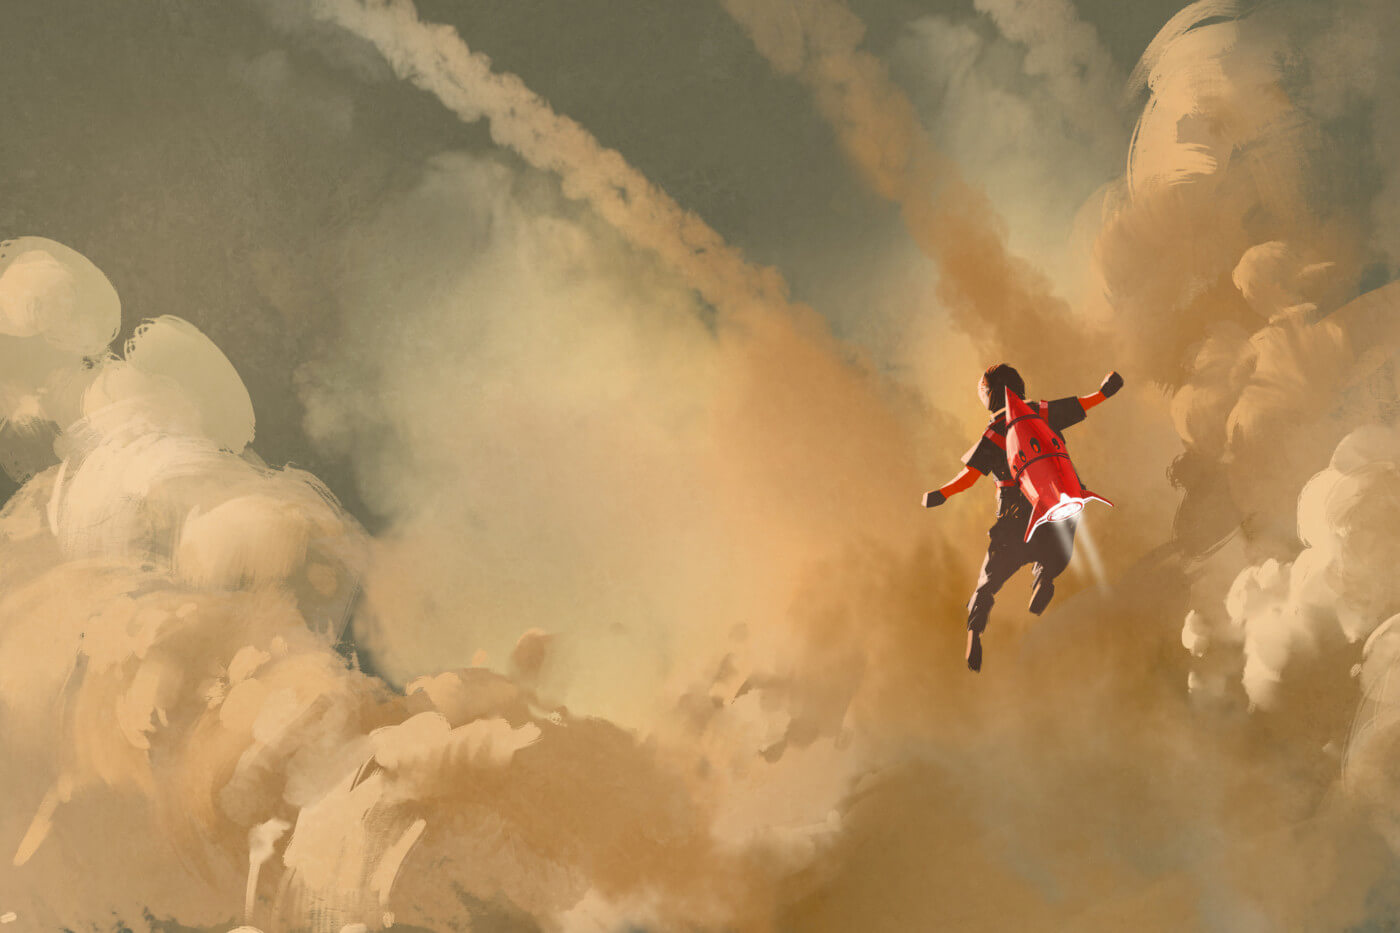 Conflict resolution: boy in clouds with jetpack